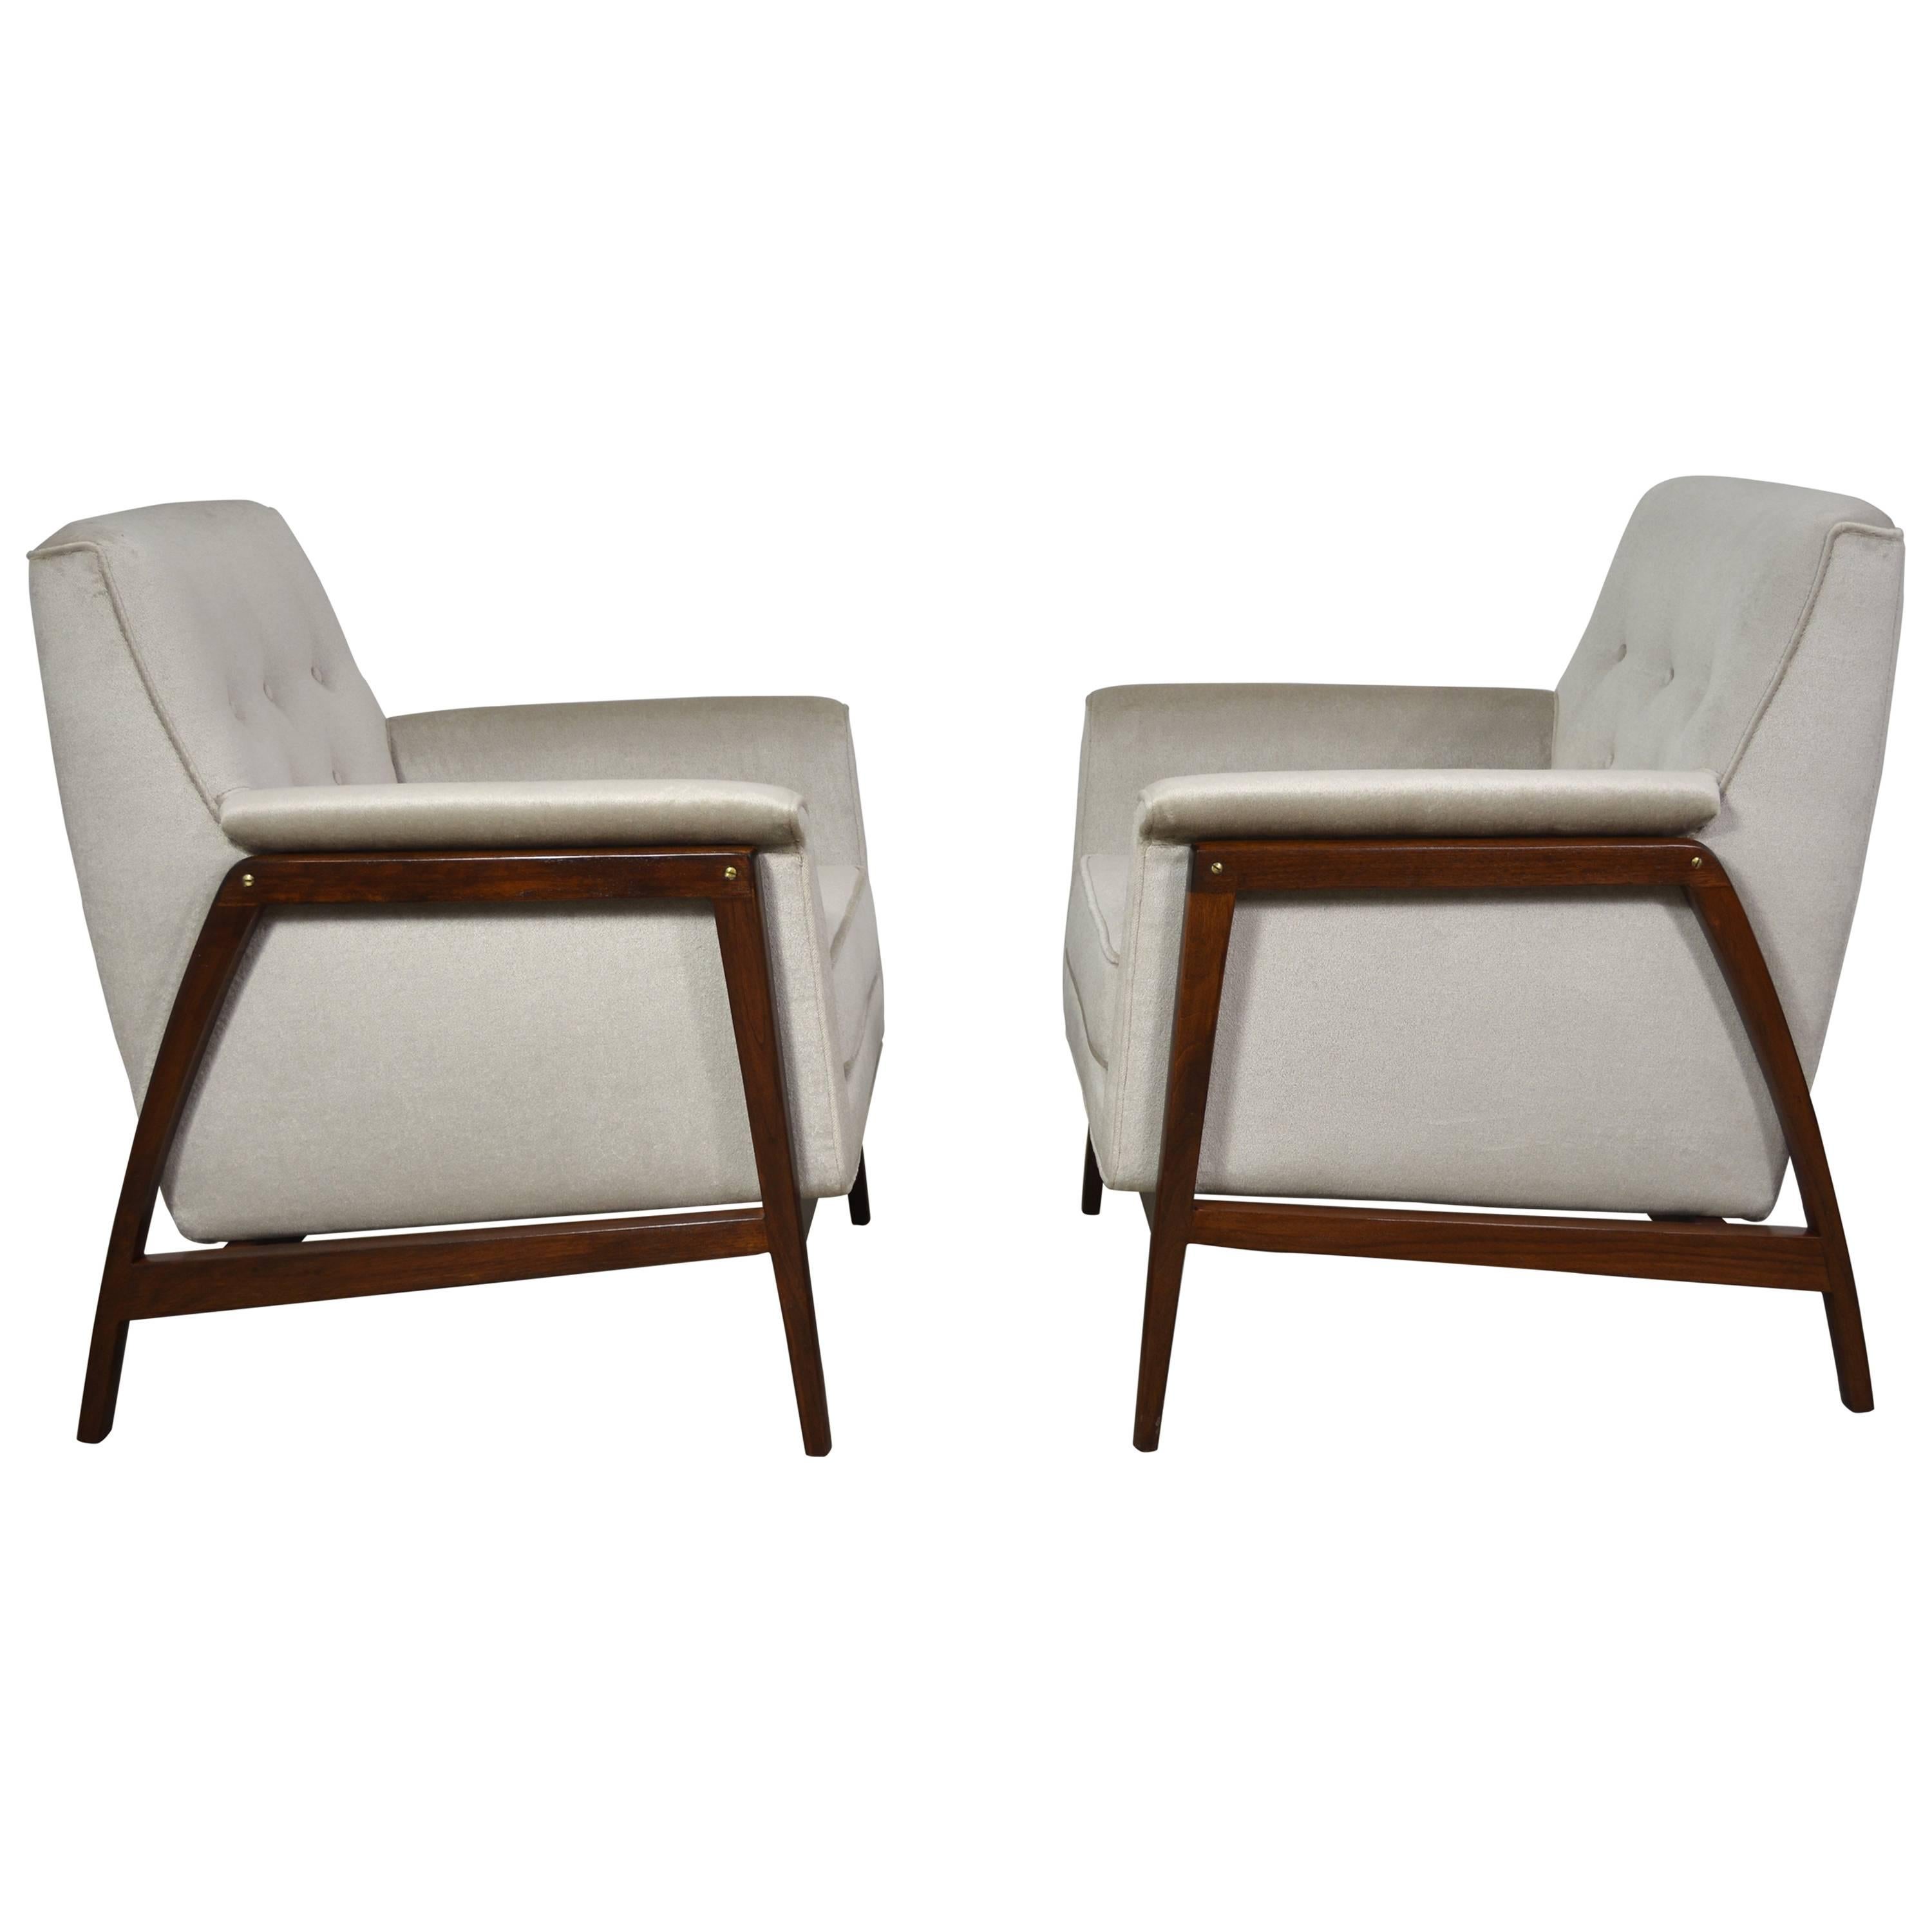 Edward Wormley Lounge Chairs For Sale